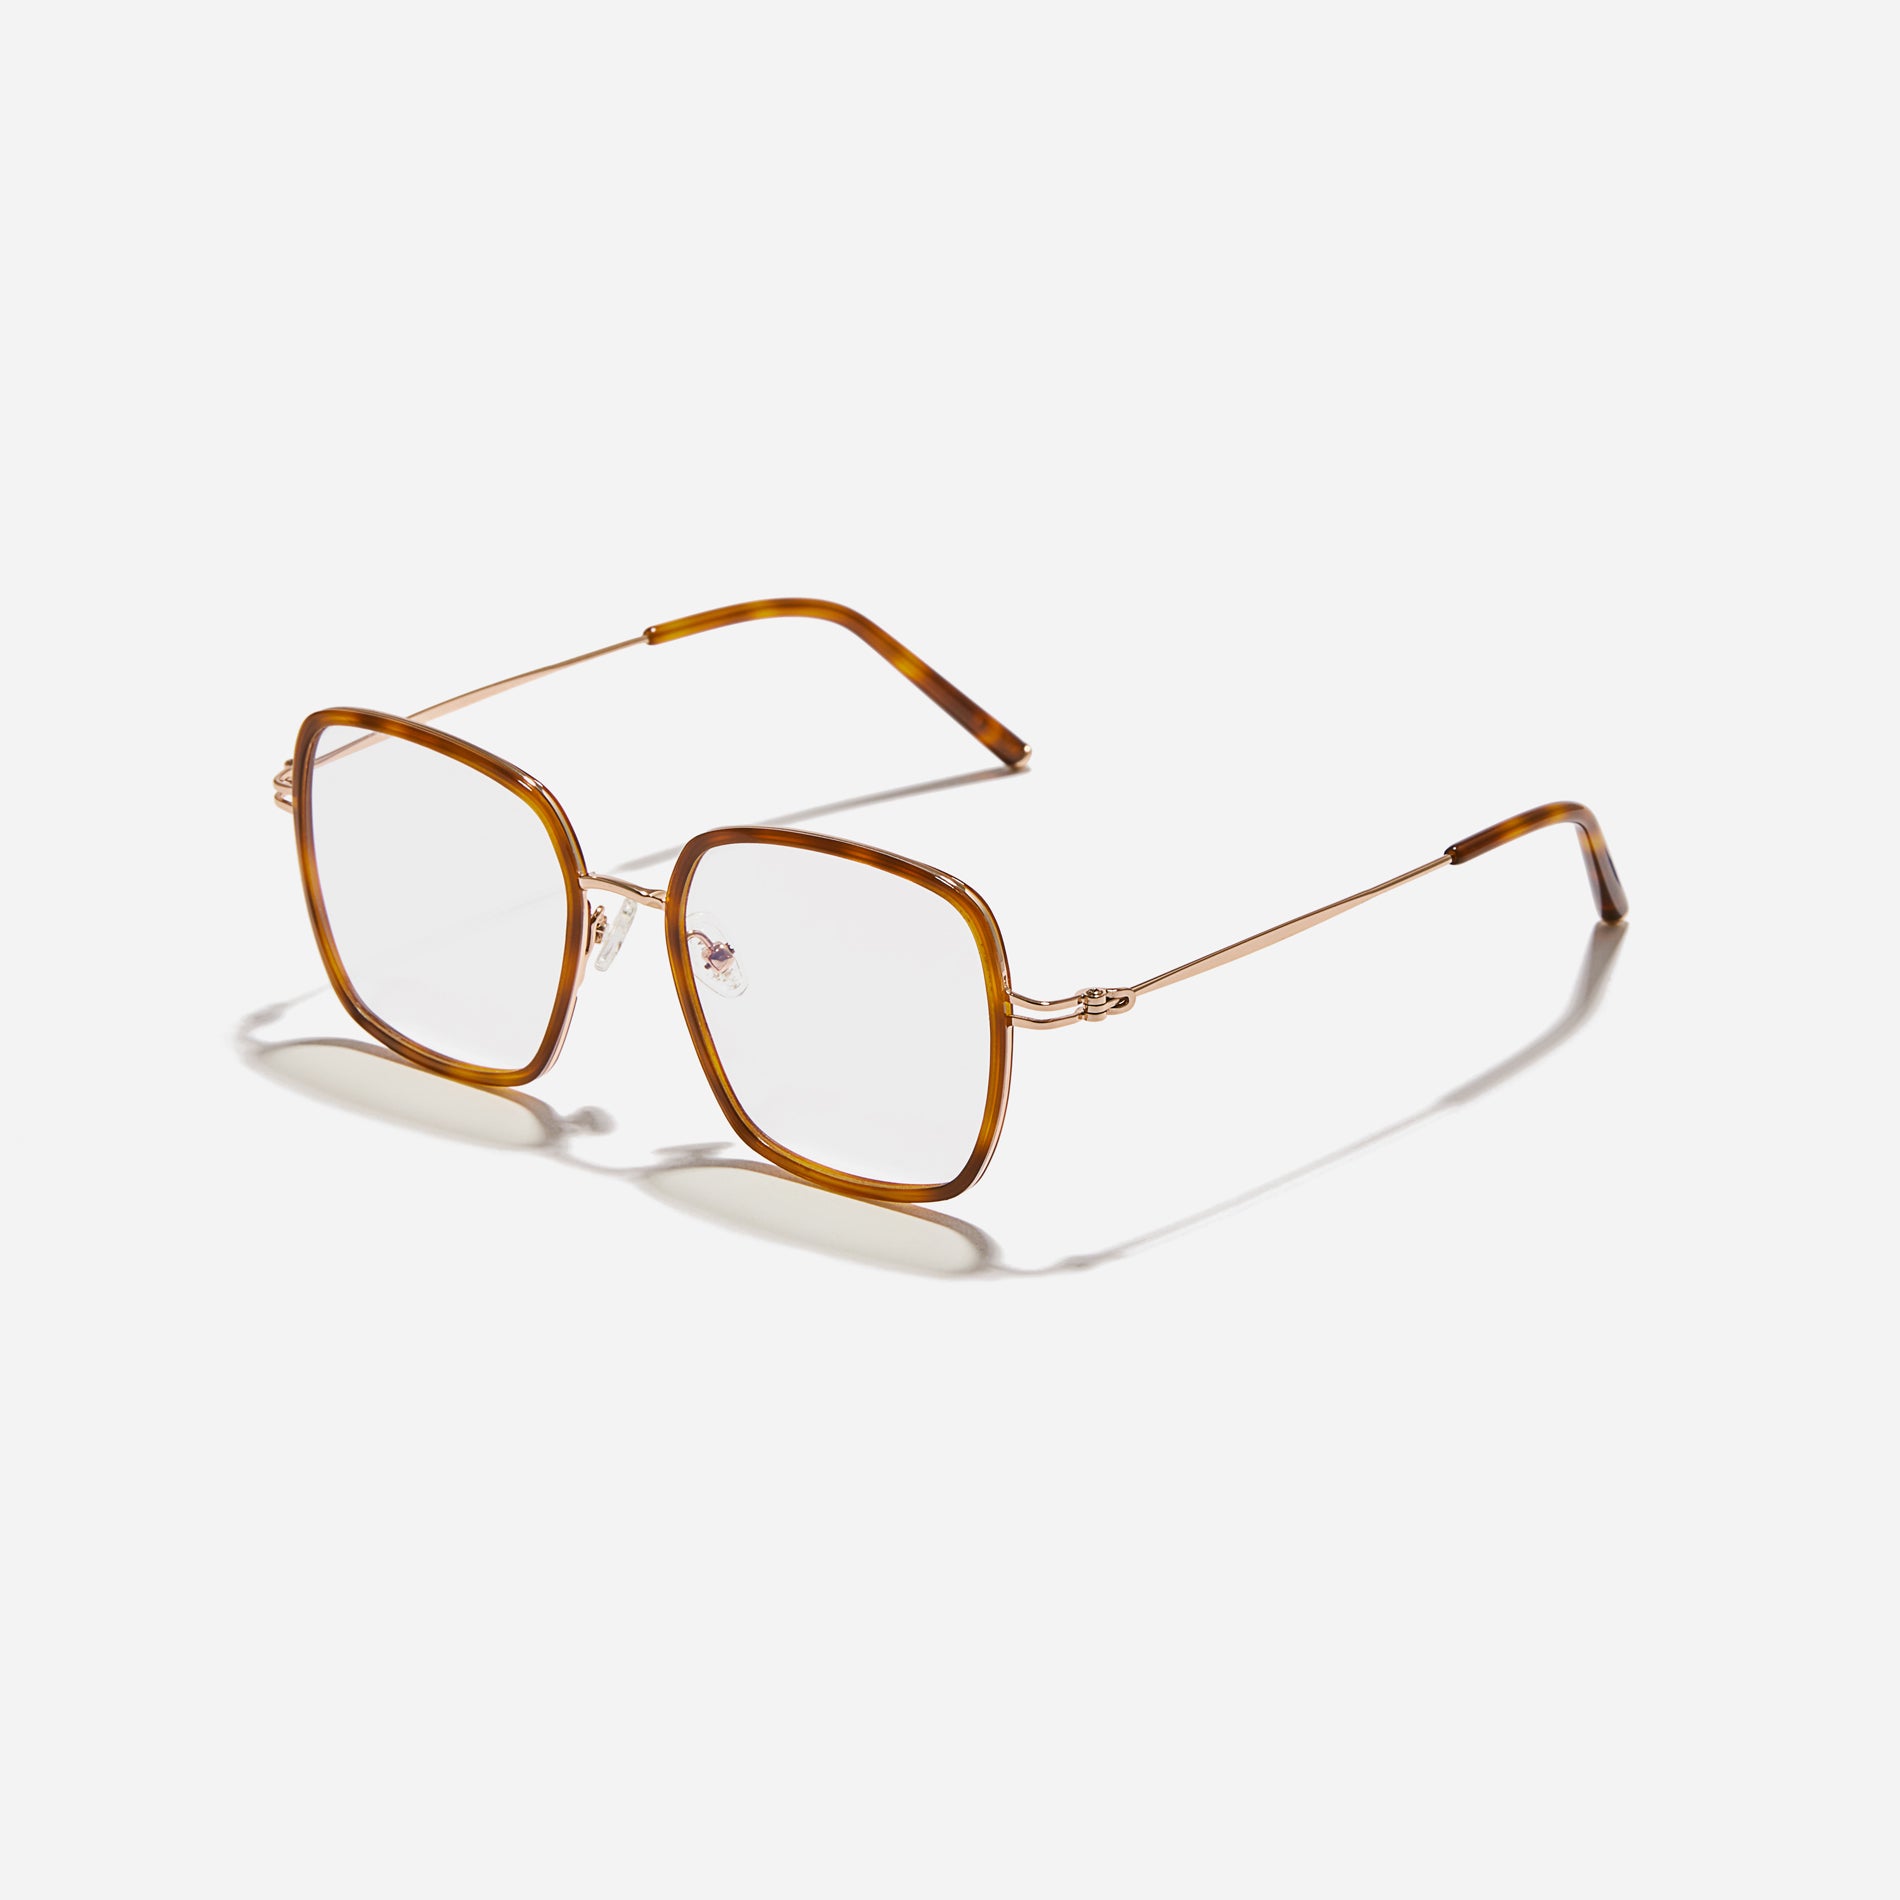 Rectangular-shaped oversized eyeglasses  characterized by a delicate acetate rim that secures the frame and hinge details.  The slim temples, made from lightweight and elastic B-Titanium material, ensure a consistently comfortable fit.